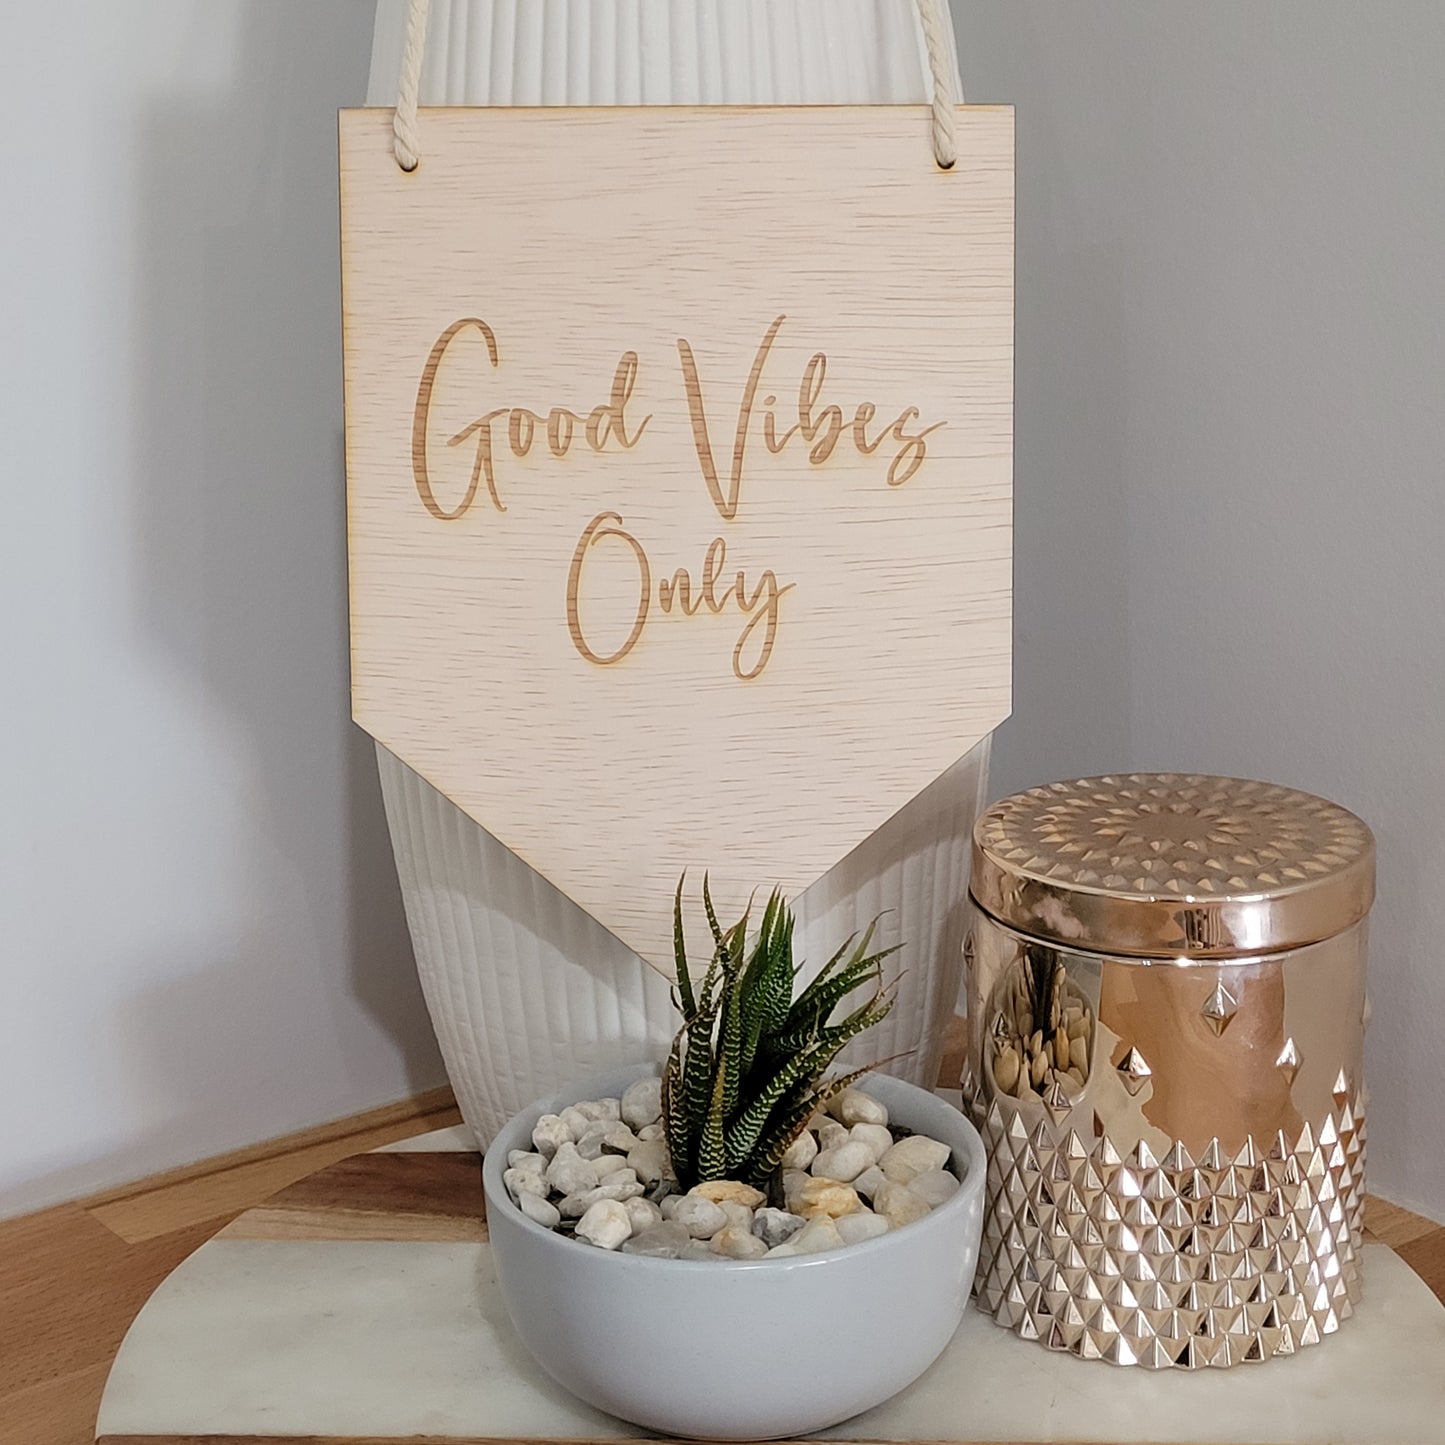 'Good Vibes Only' Plaque